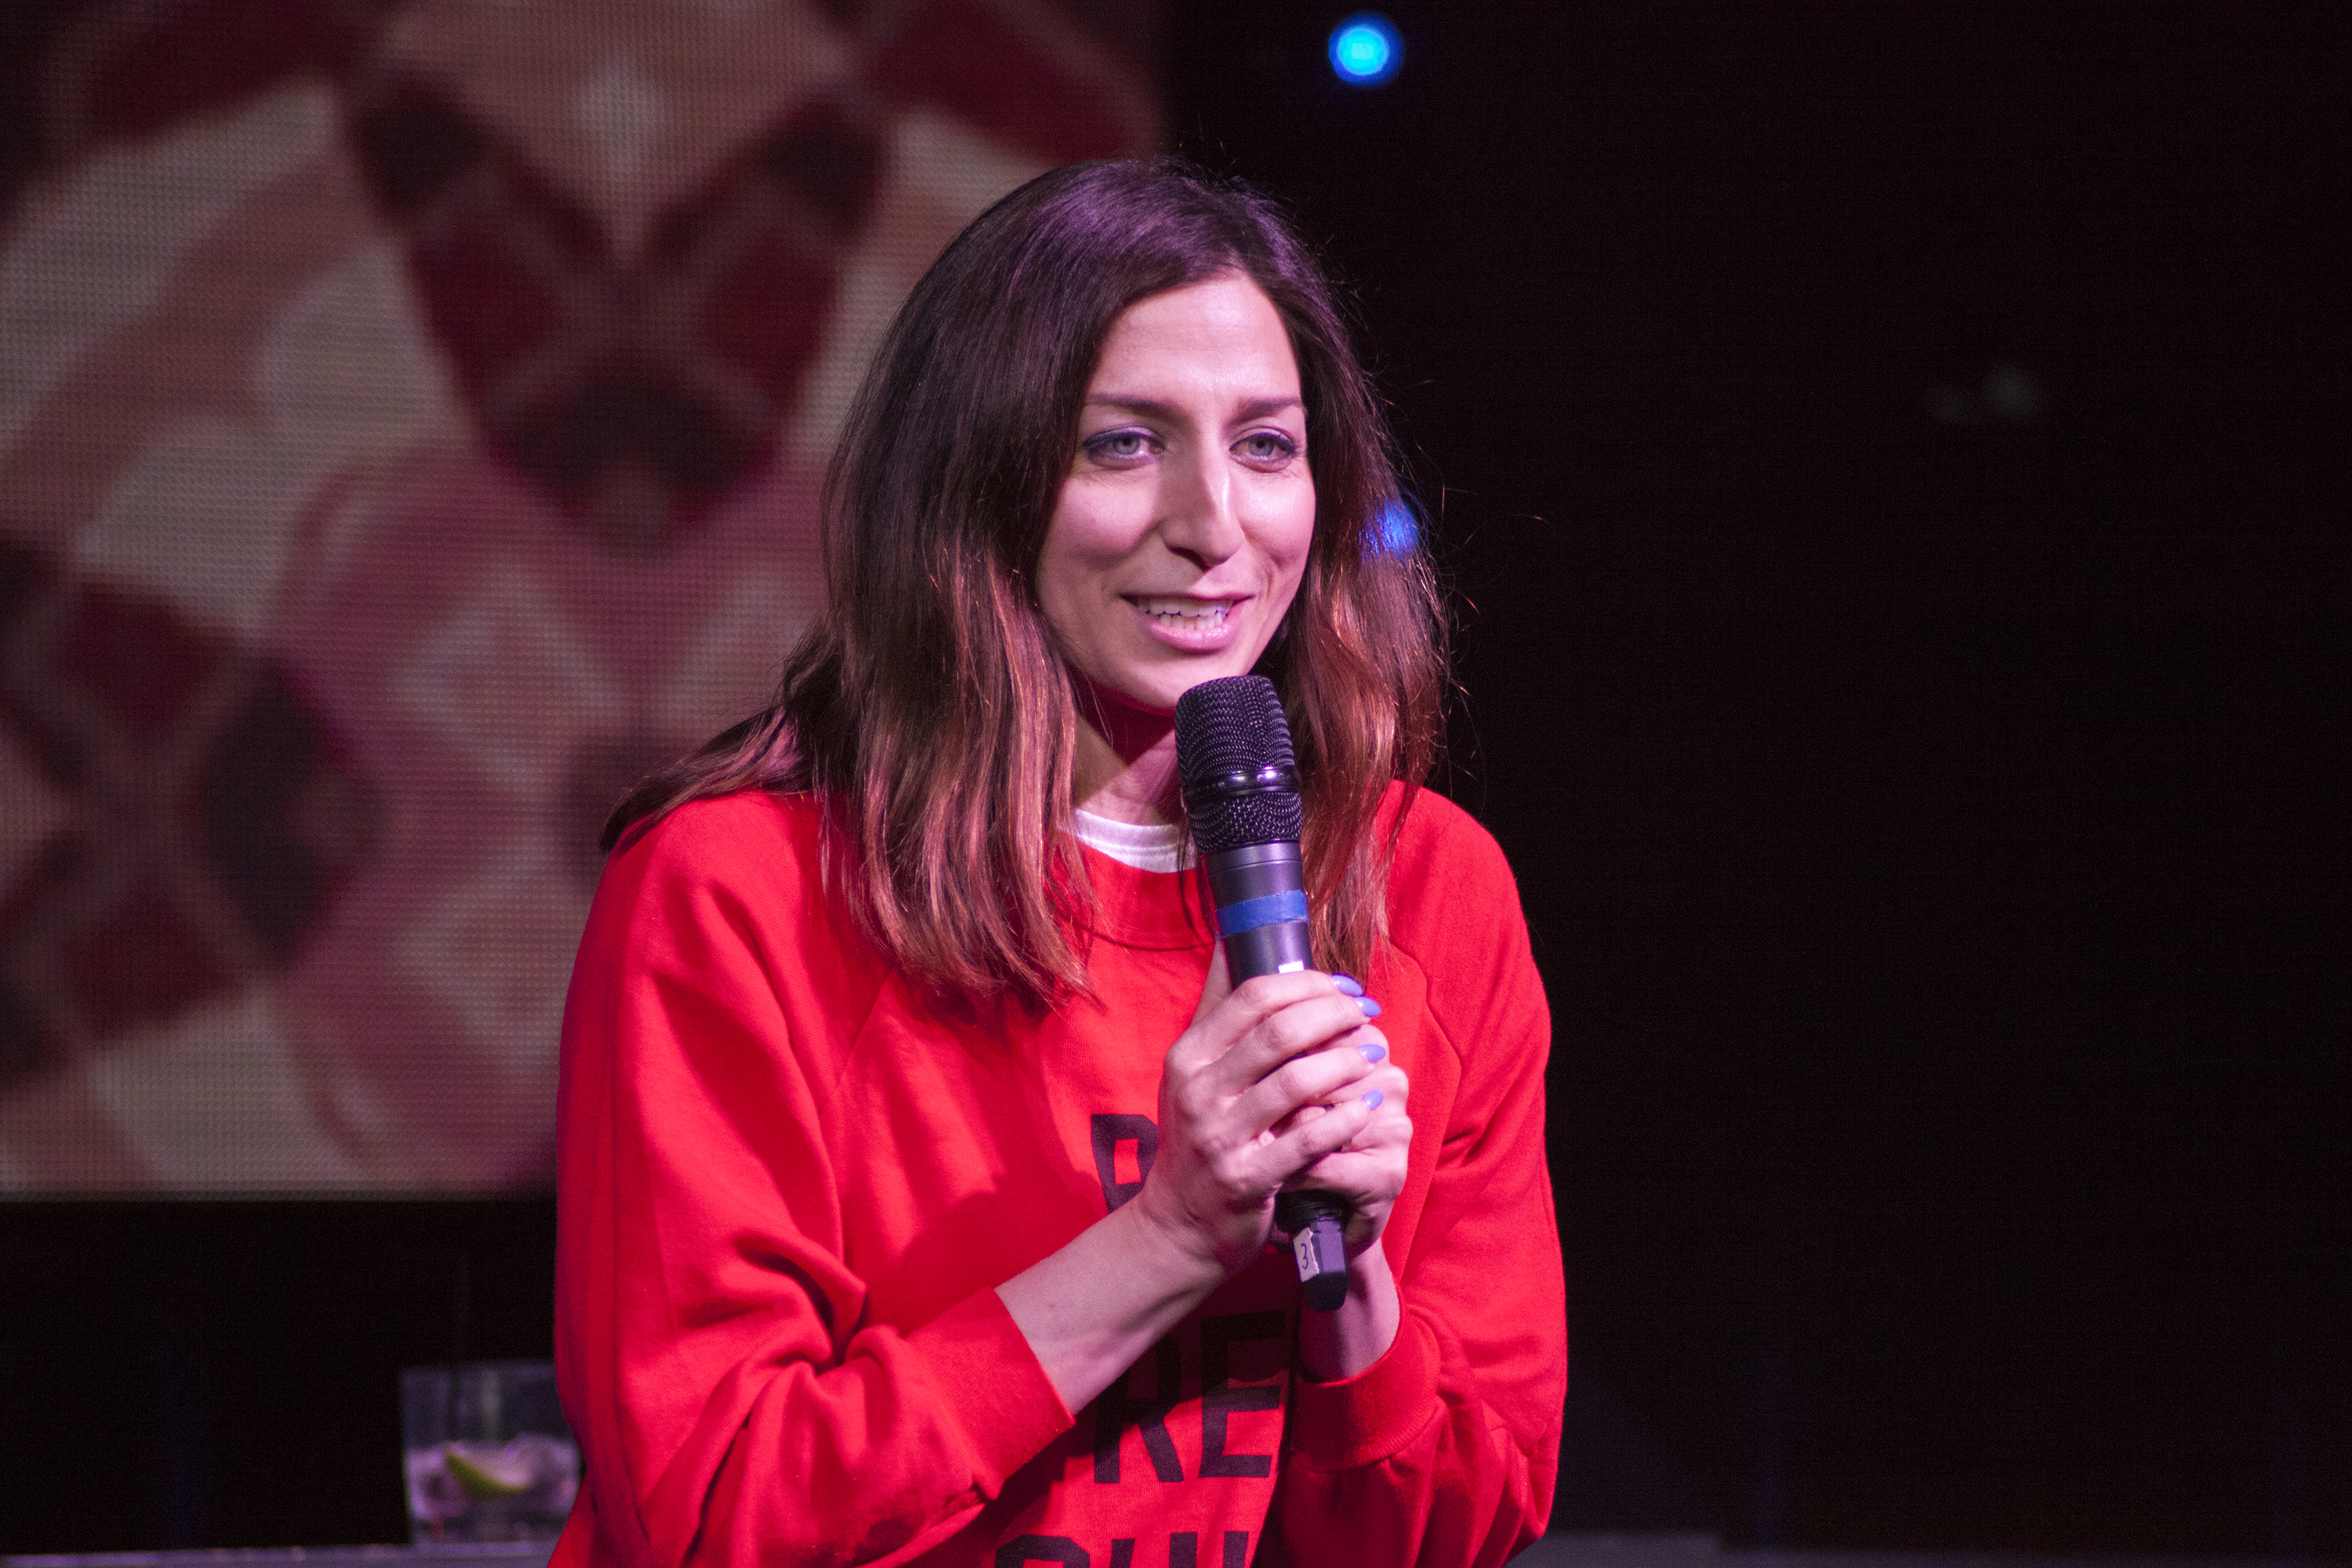 NEW YORK, NY - APRIL 21:  Chelsea Peretti onstage during Showgasm XXL at Marquee on April 21, 2016 in New York City.  (Photo by Santiago Felipe/Getty Images) (Santiago Felipe—Getty Images)